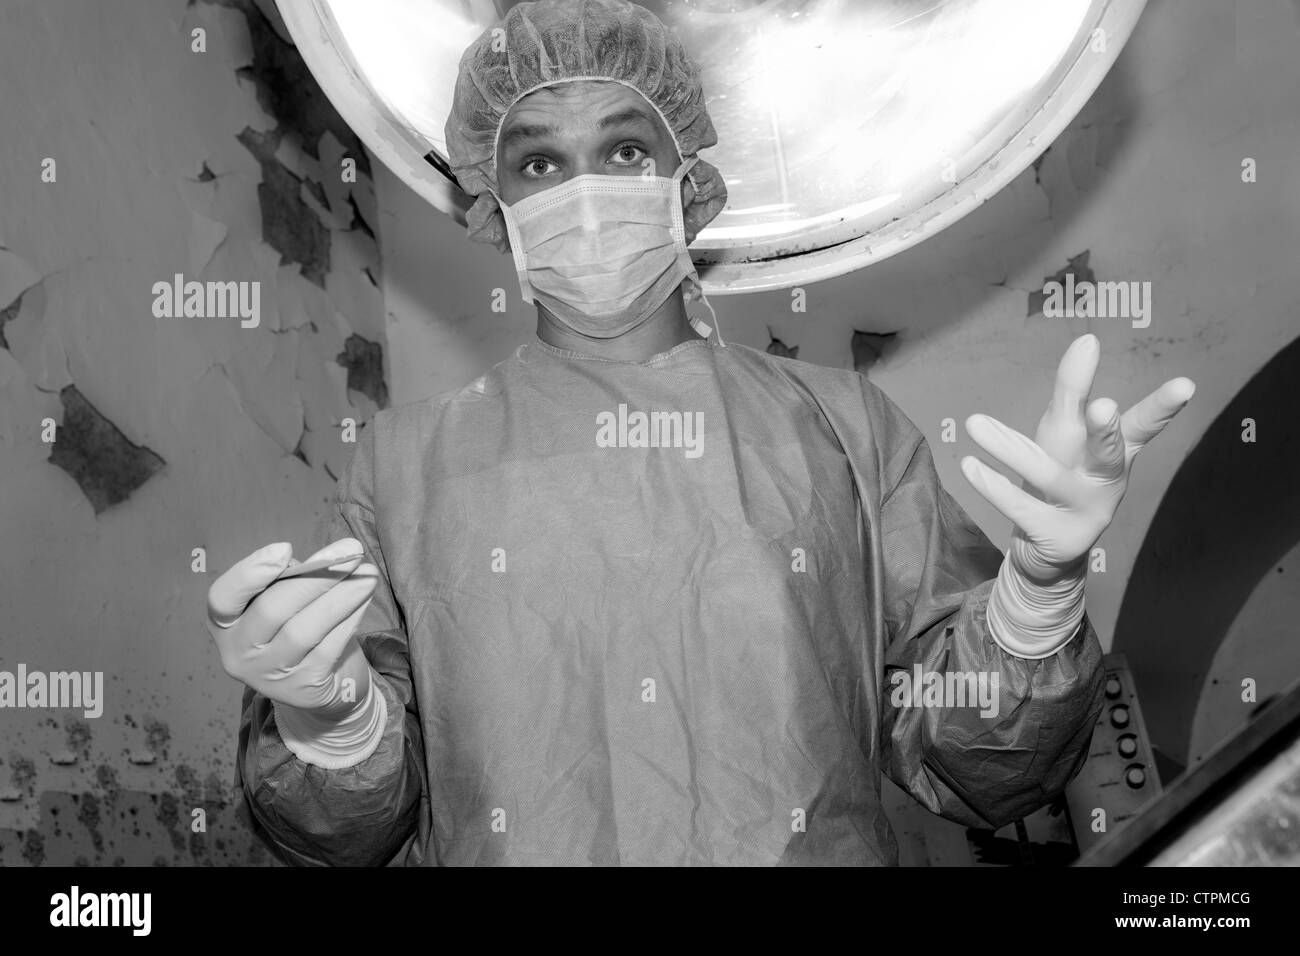 Shaded surgeon ask camera before coming difficult surgery Stock Photo